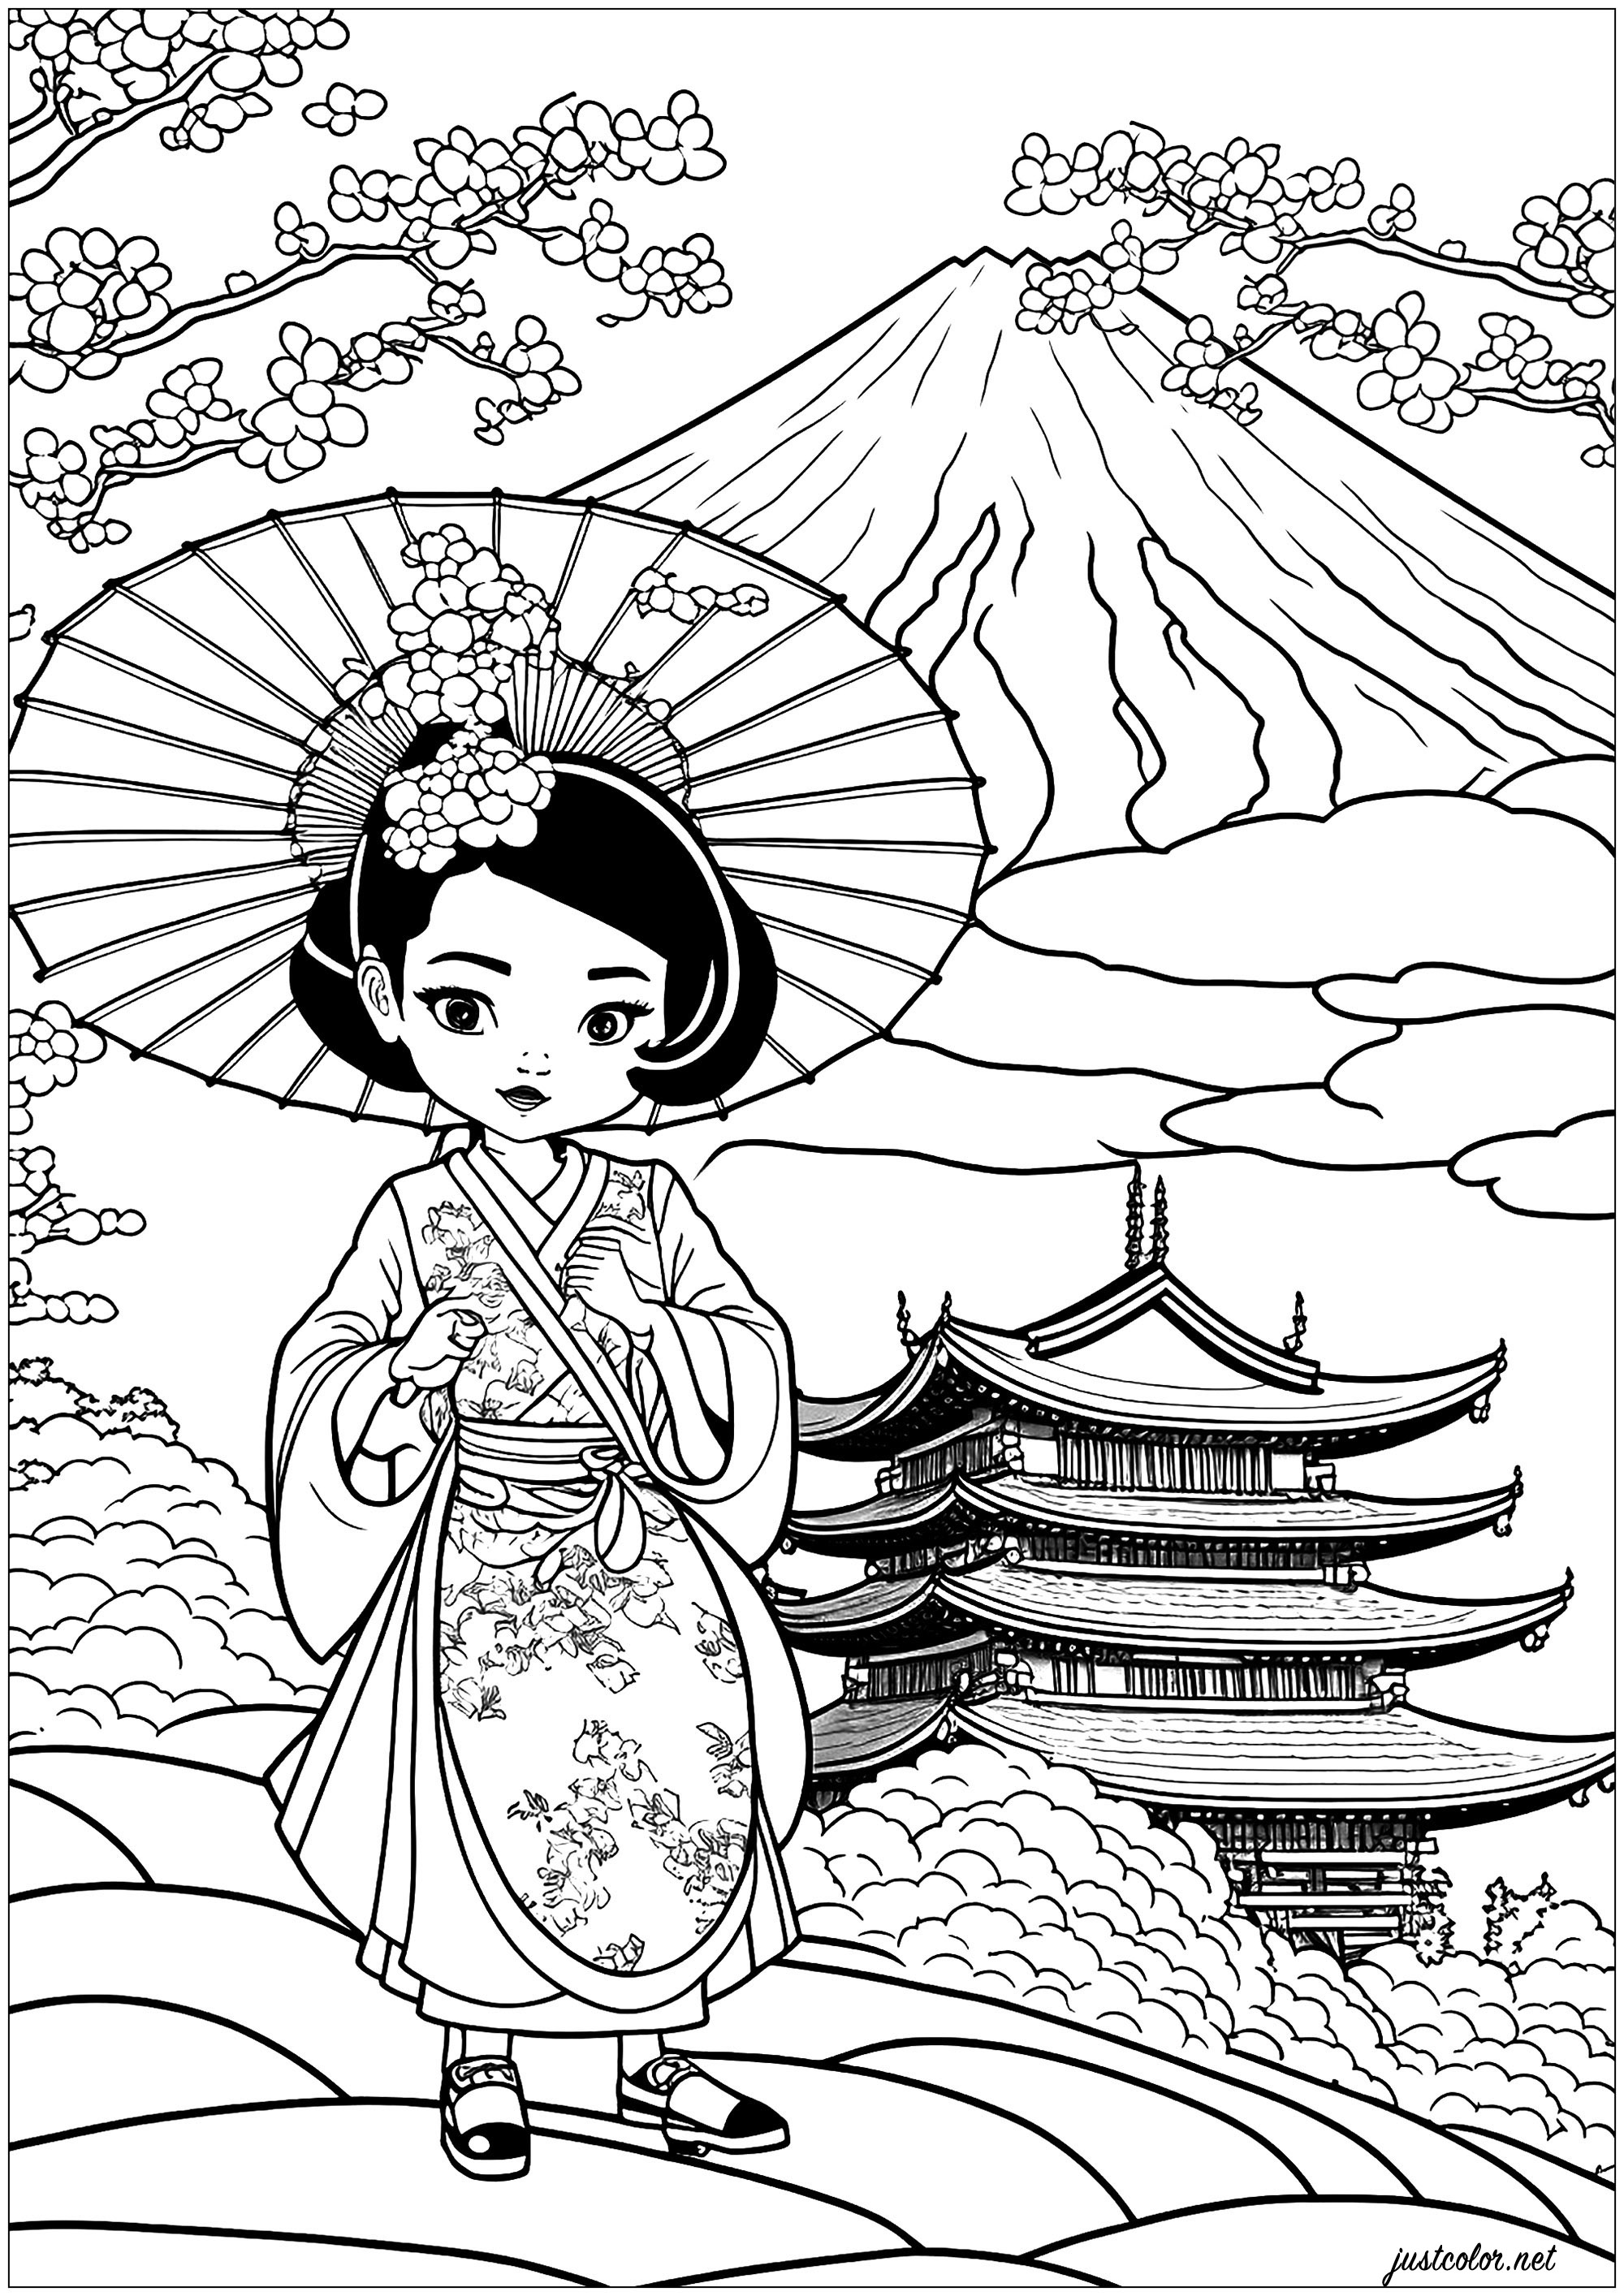 Cartoon Geisha coloring page. A complex coloring page with a beautiful Geisha in her beautiful kimono, and a magnificent Japanese landscape.